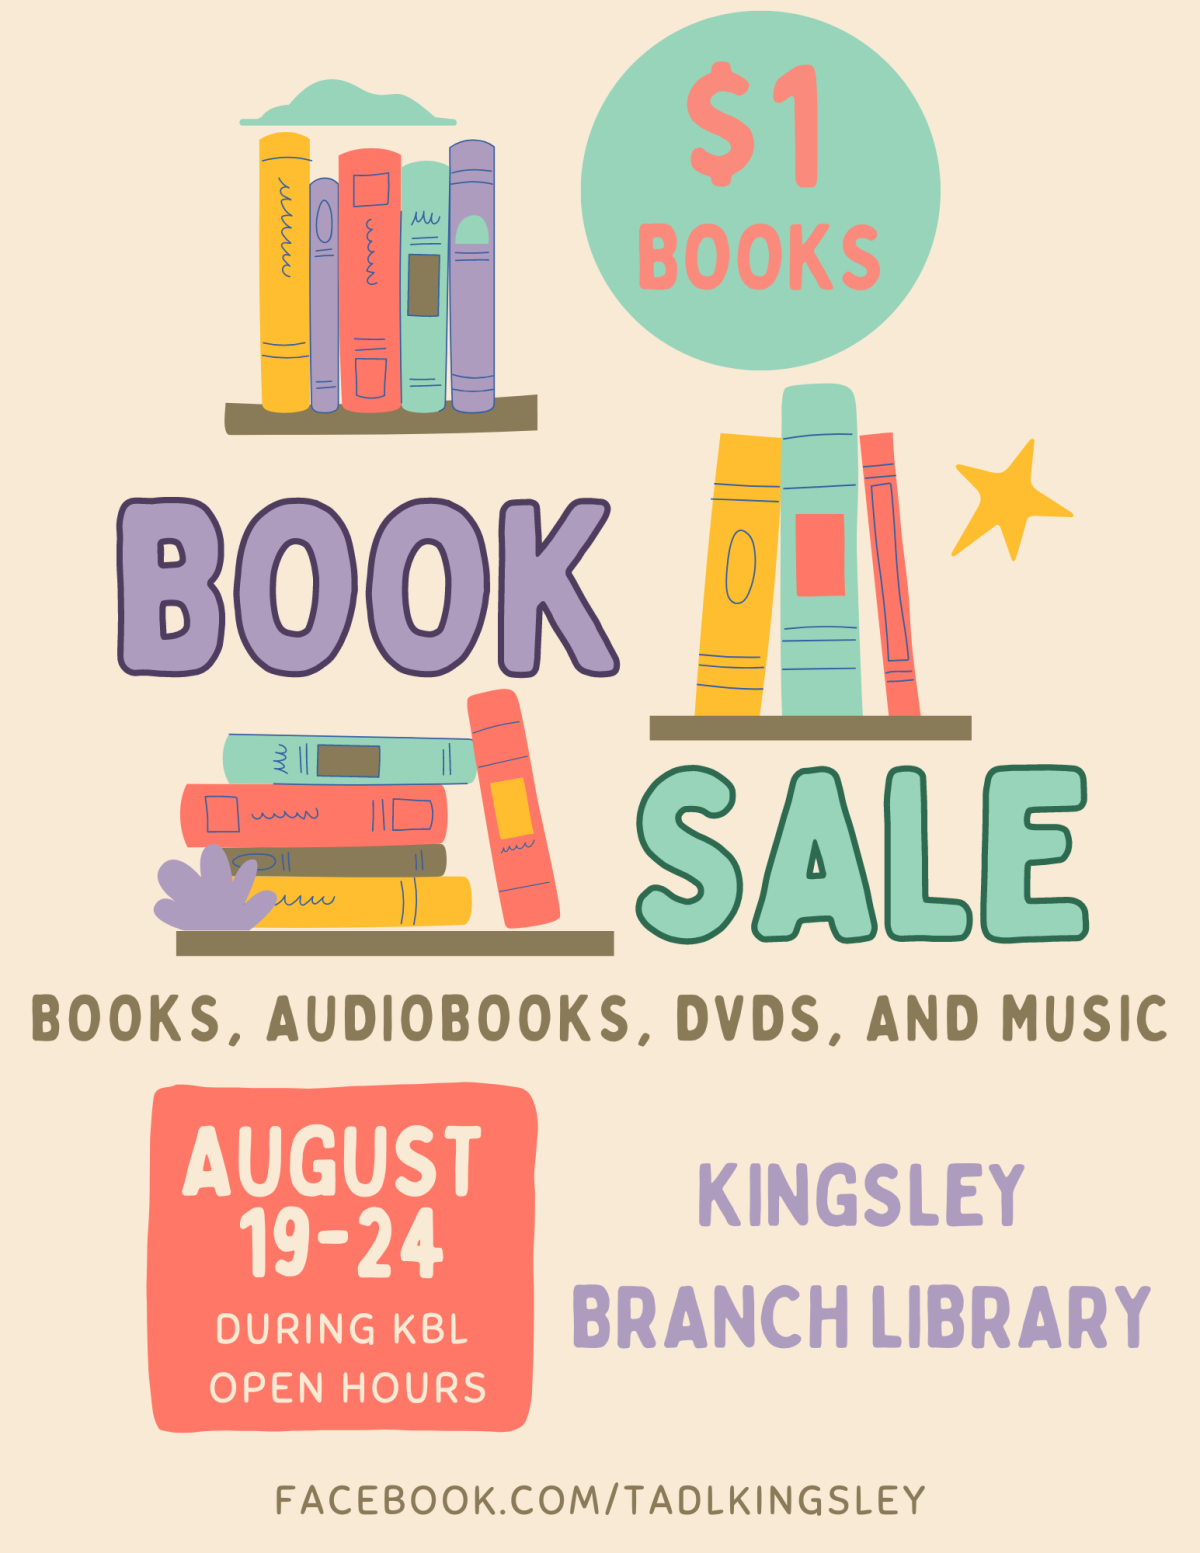 Image of books on a shelf, text reads "books, music, movie, and audiobooks on sale $1 per item, August 19th-24th."